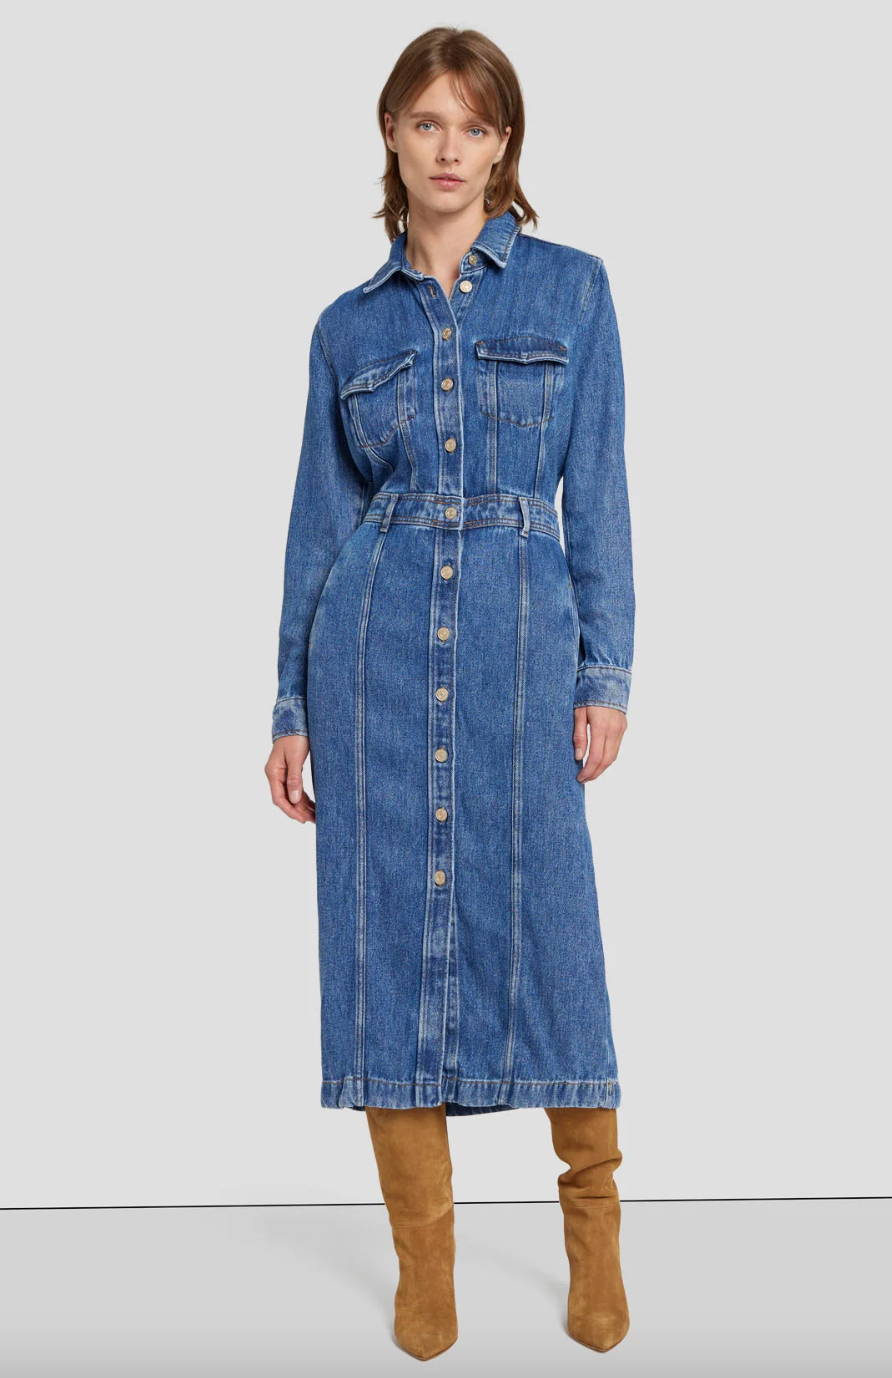 Denim Dress Outfit w. Belt for Women | Luci's Morsels